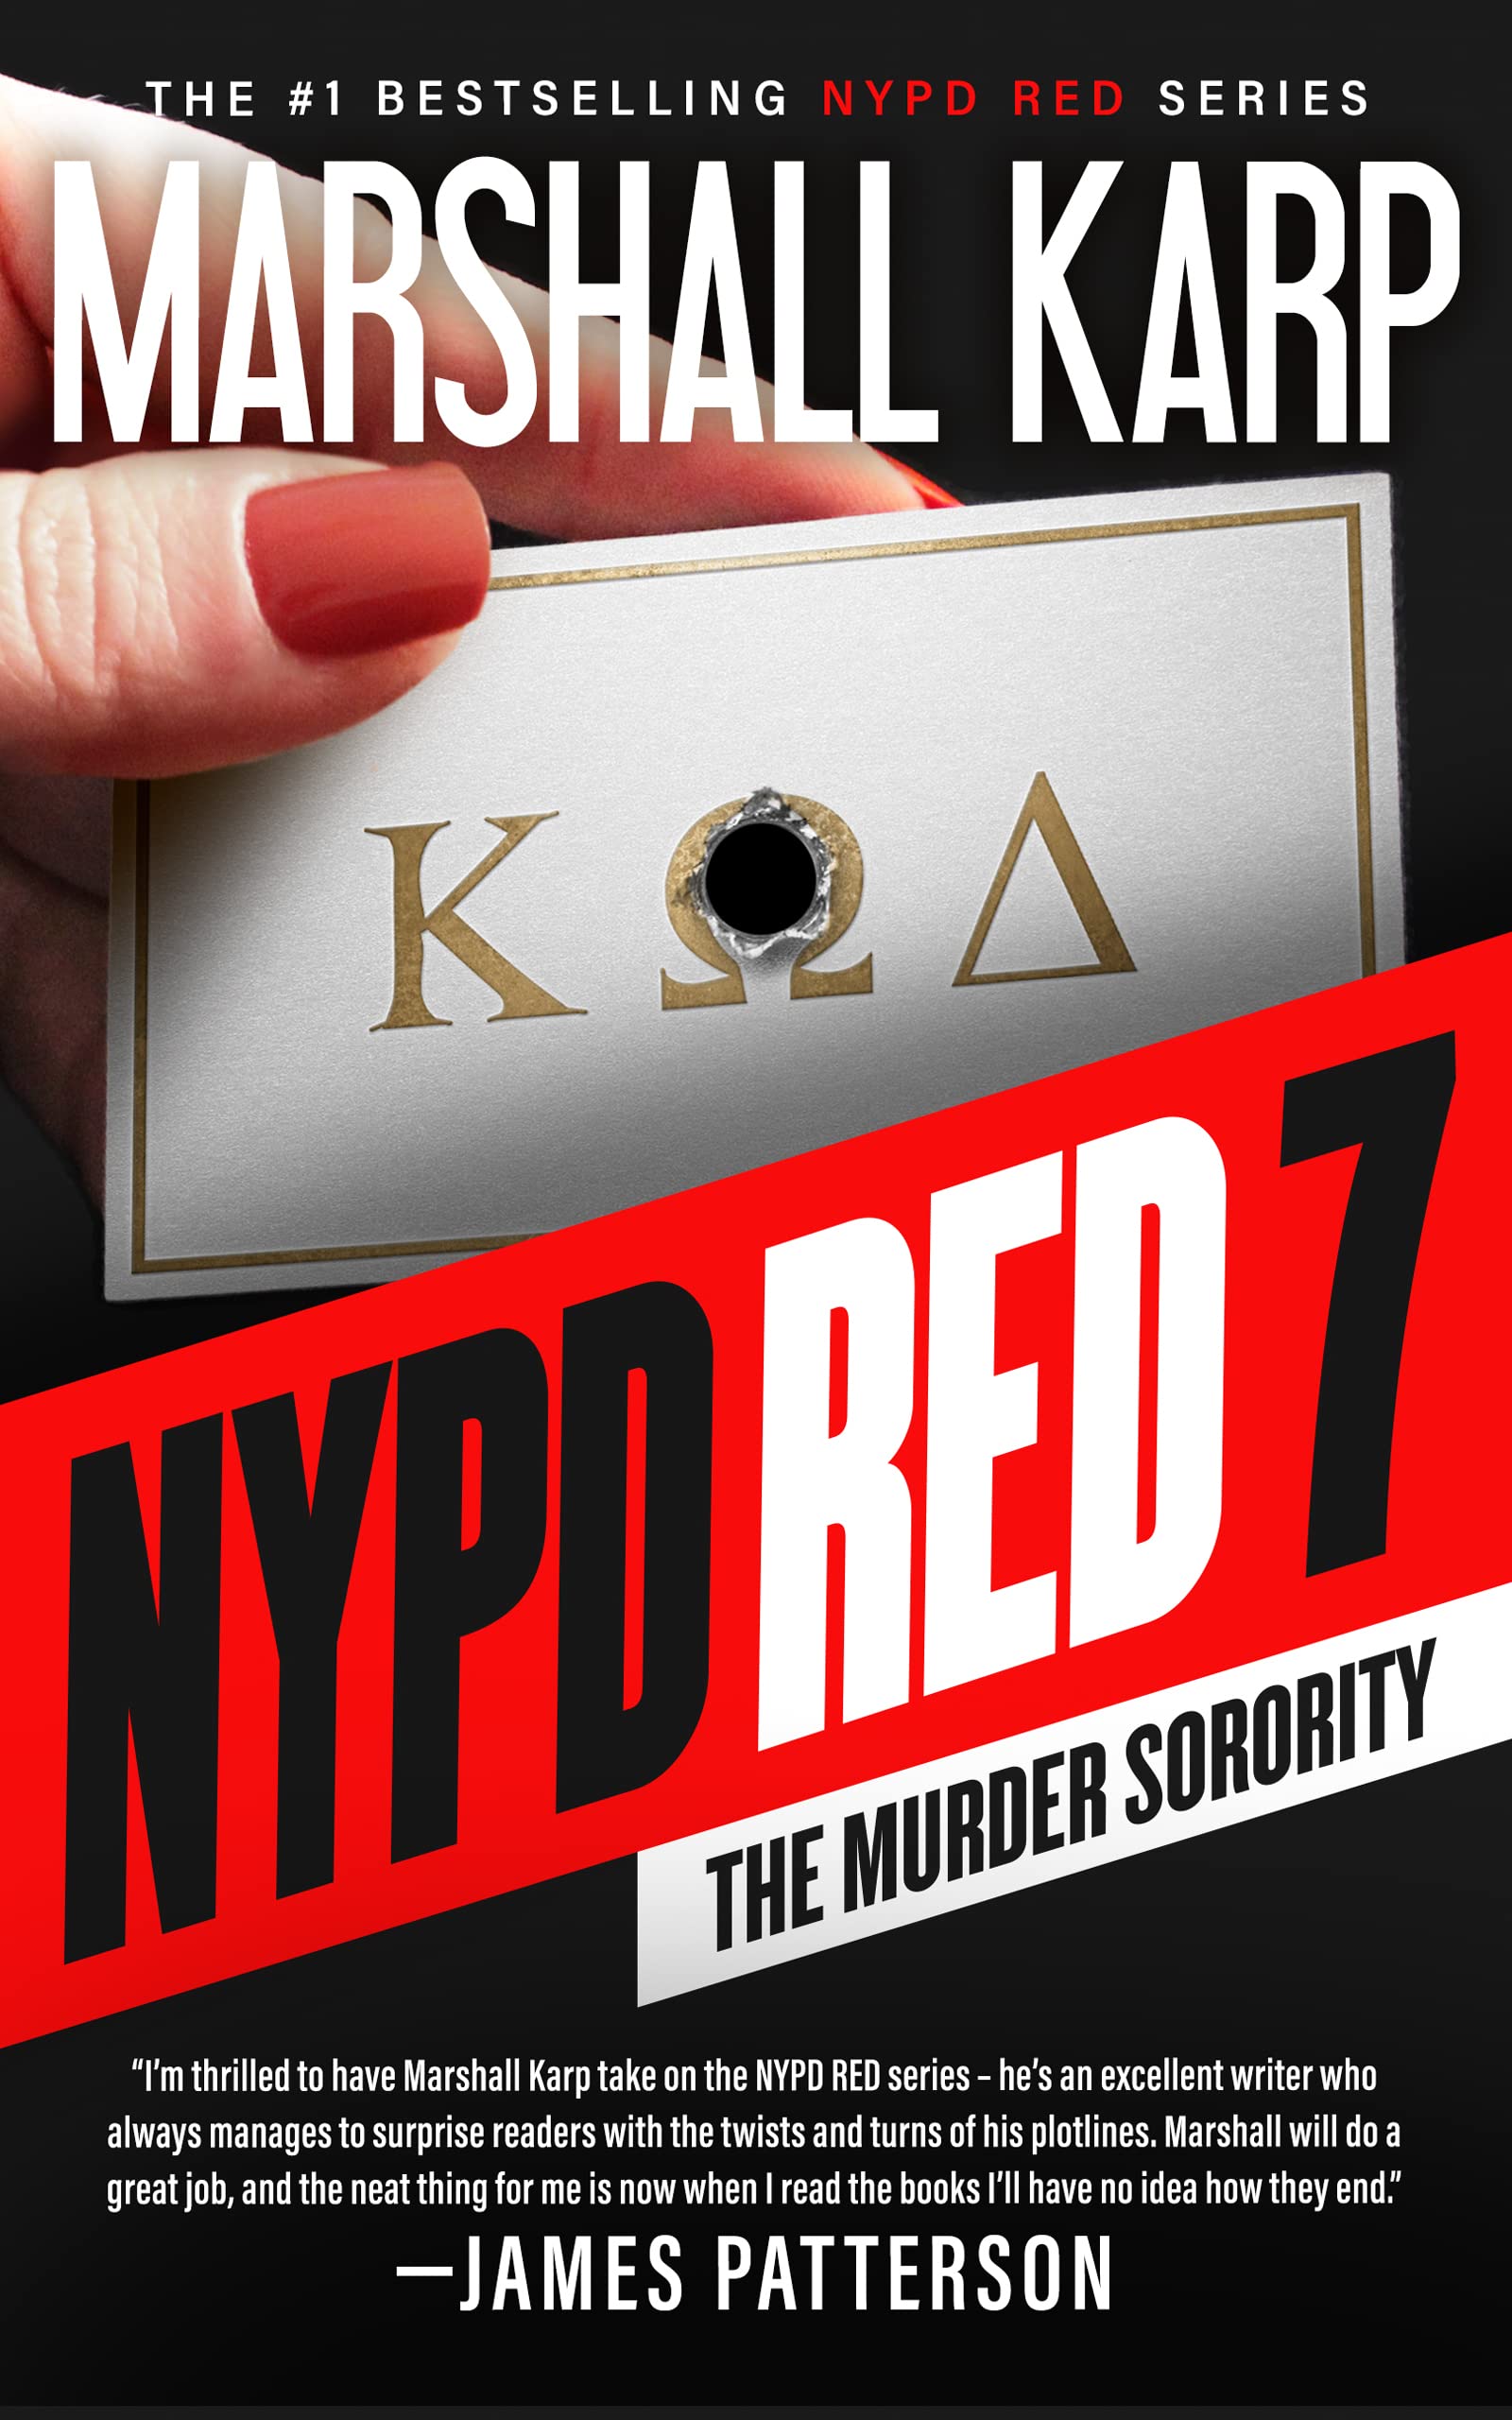 NYPD Red 7 : The Murder Sorority (NYPD Red Series, Book 7)